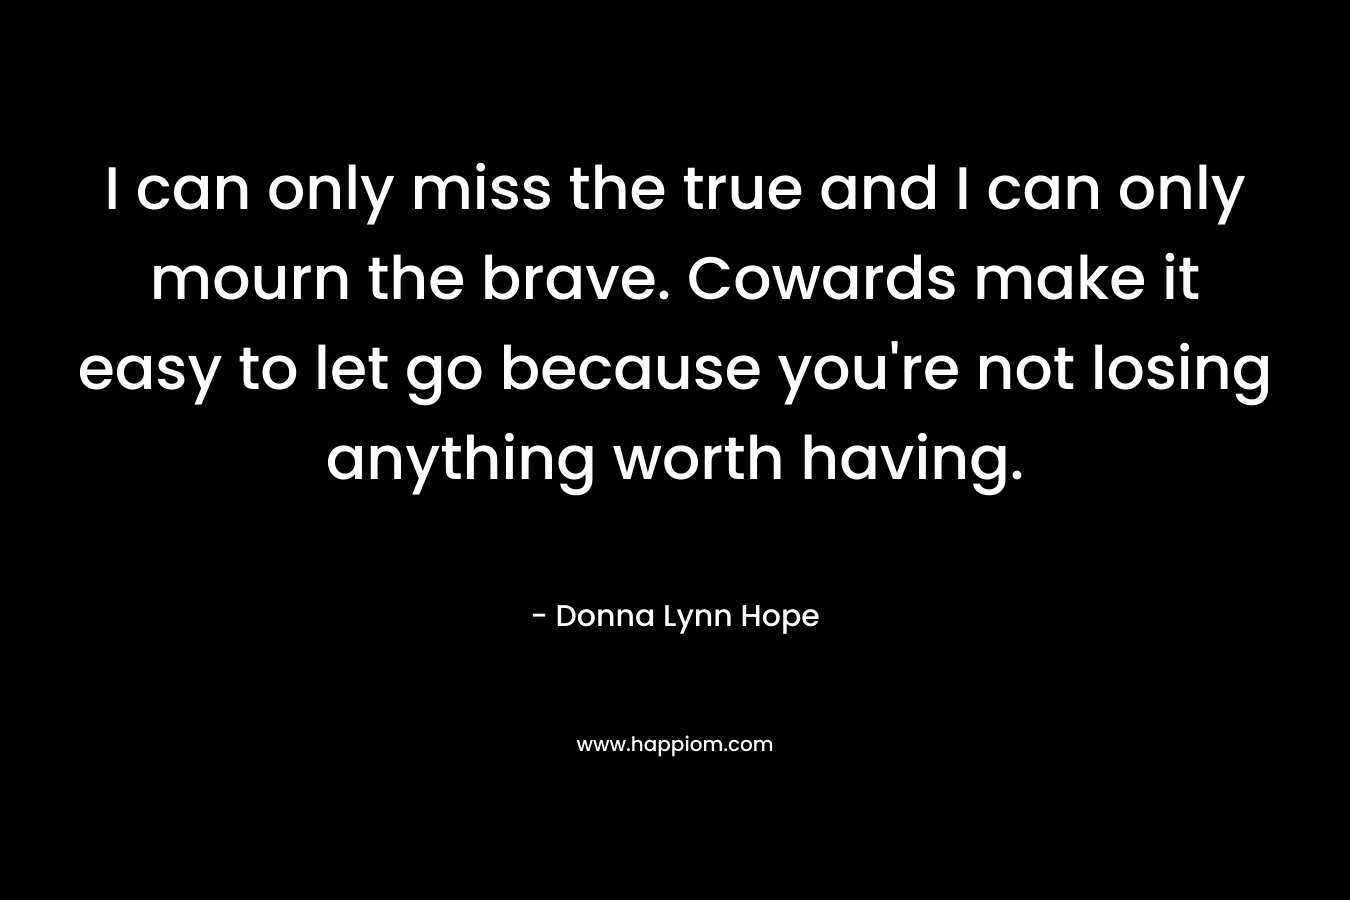 I can only miss the true and I can only mourn the brave. Cowards make it easy to let go because you’re not losing anything worth having. – Donna Lynn Hope